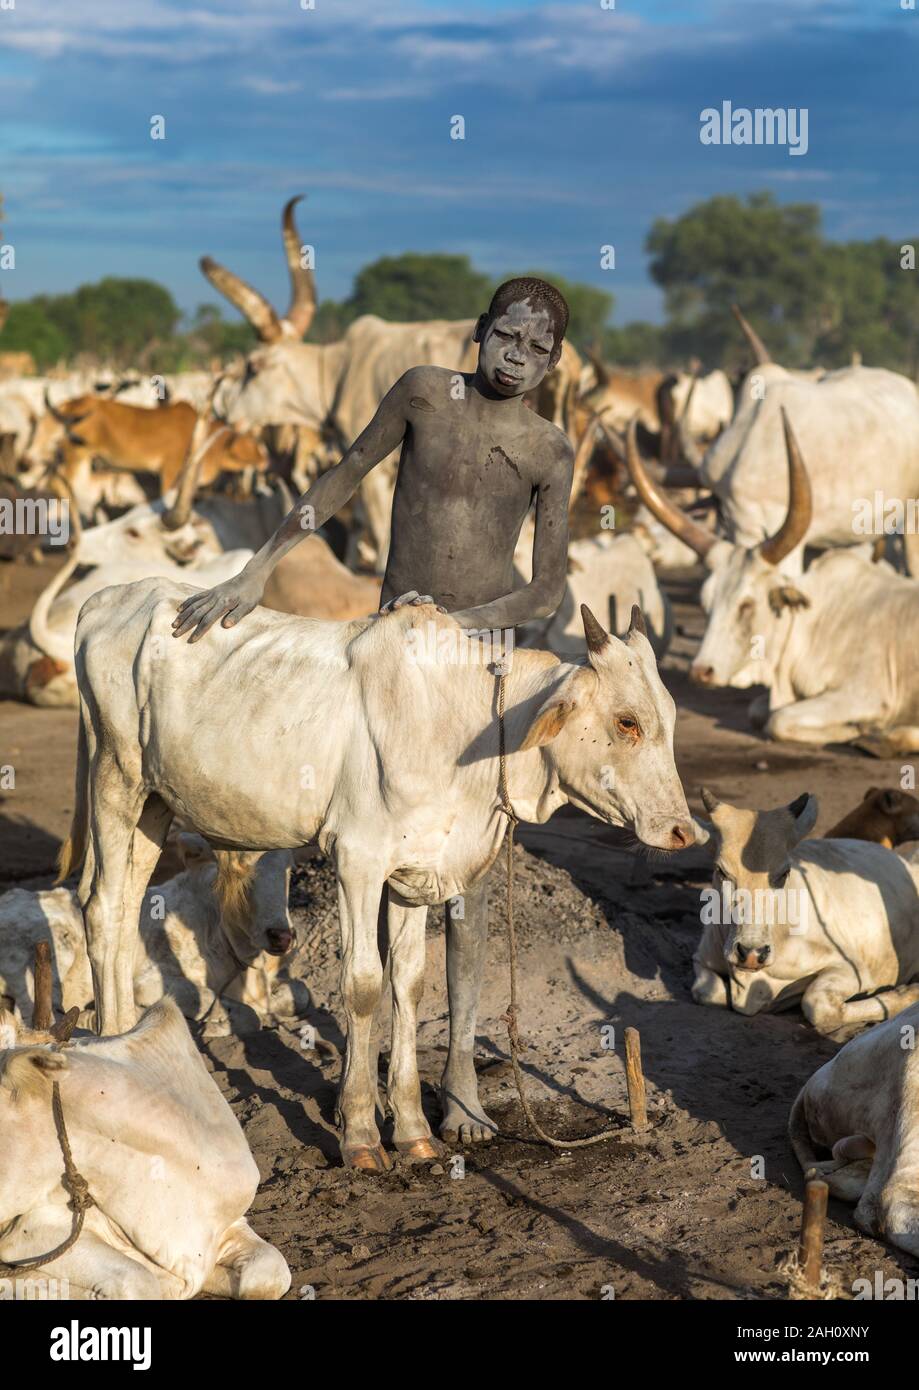 Mundari tribe boy covering his cow in ash from the dung fires to repel flies and mosquitoes, Central Equatoria, Terekeka, South Sudan Stock Photo